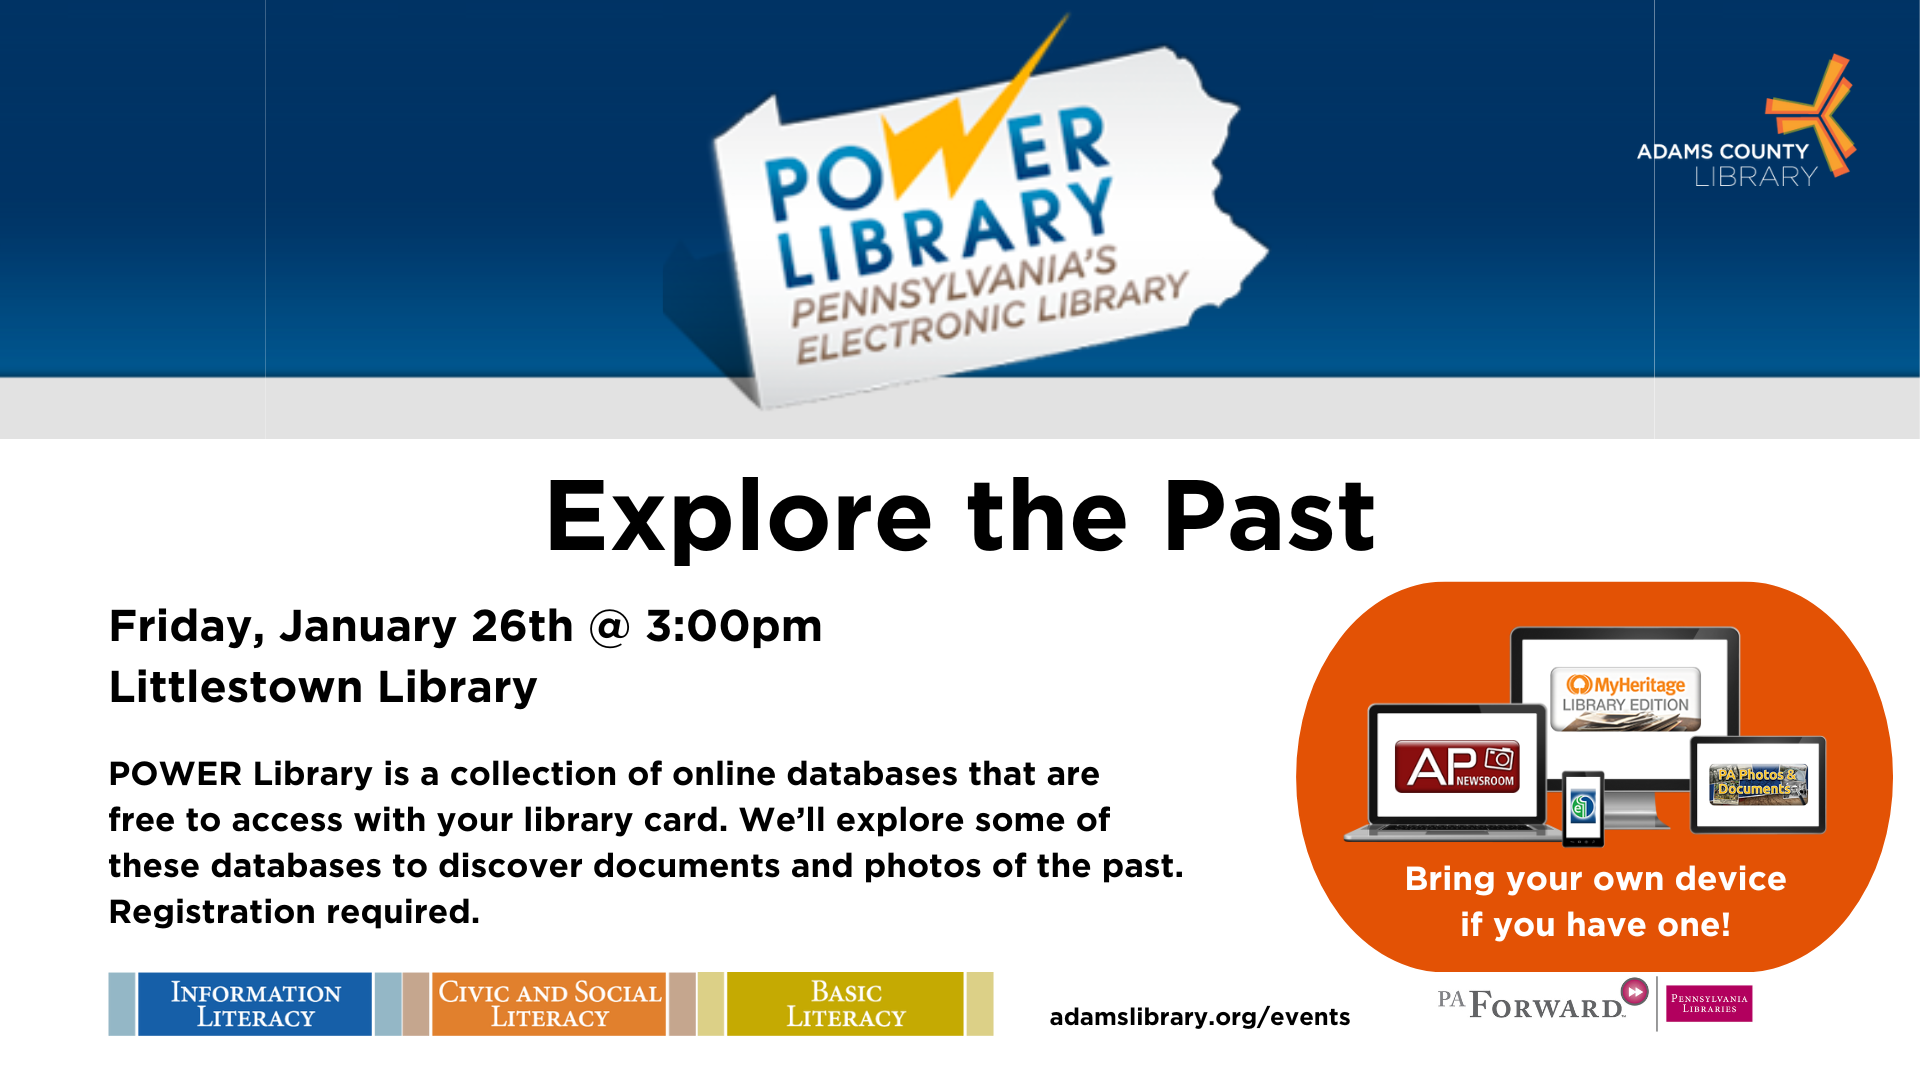 Power Library Explore the Past